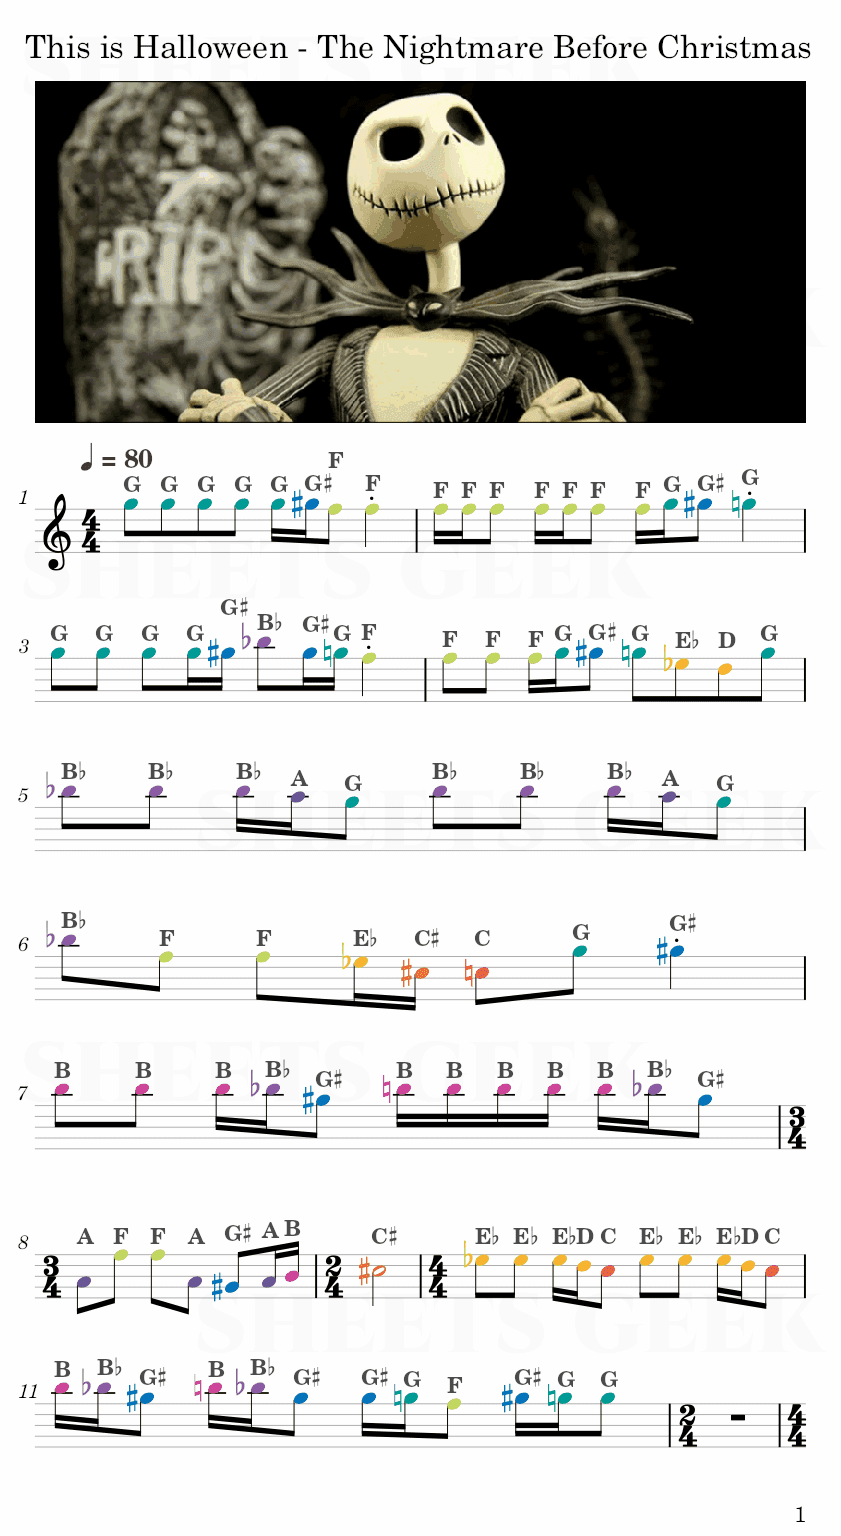 This is Halloween - The Nightmare Before Christmas Easy Sheet Music Free for piano, keyboard, flute, violin, sax, cello page 1